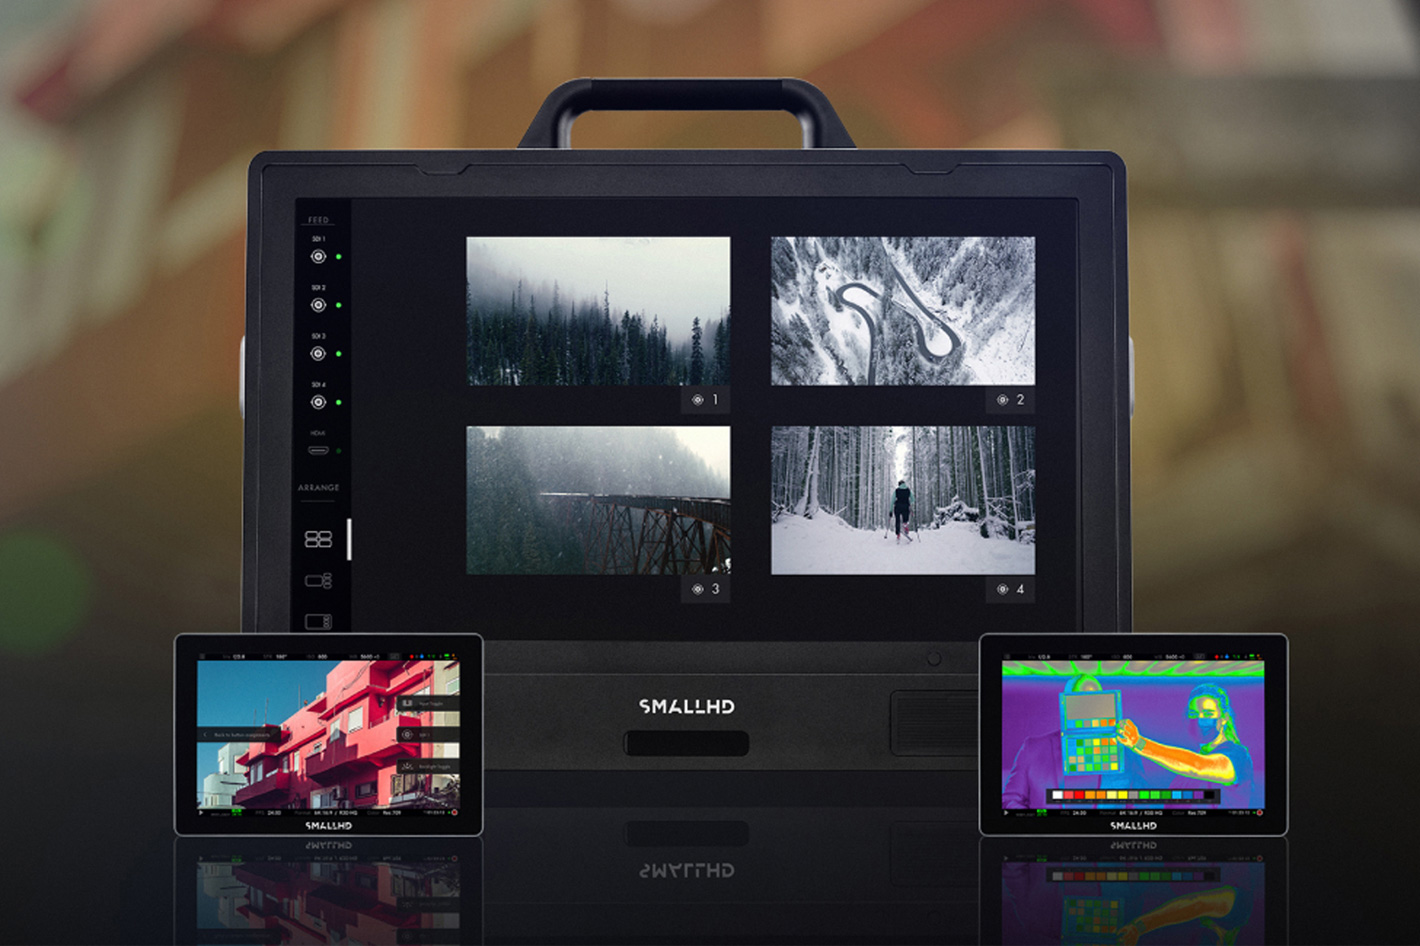 SmallHD’s Free PageOS 5 firmware update brings new features